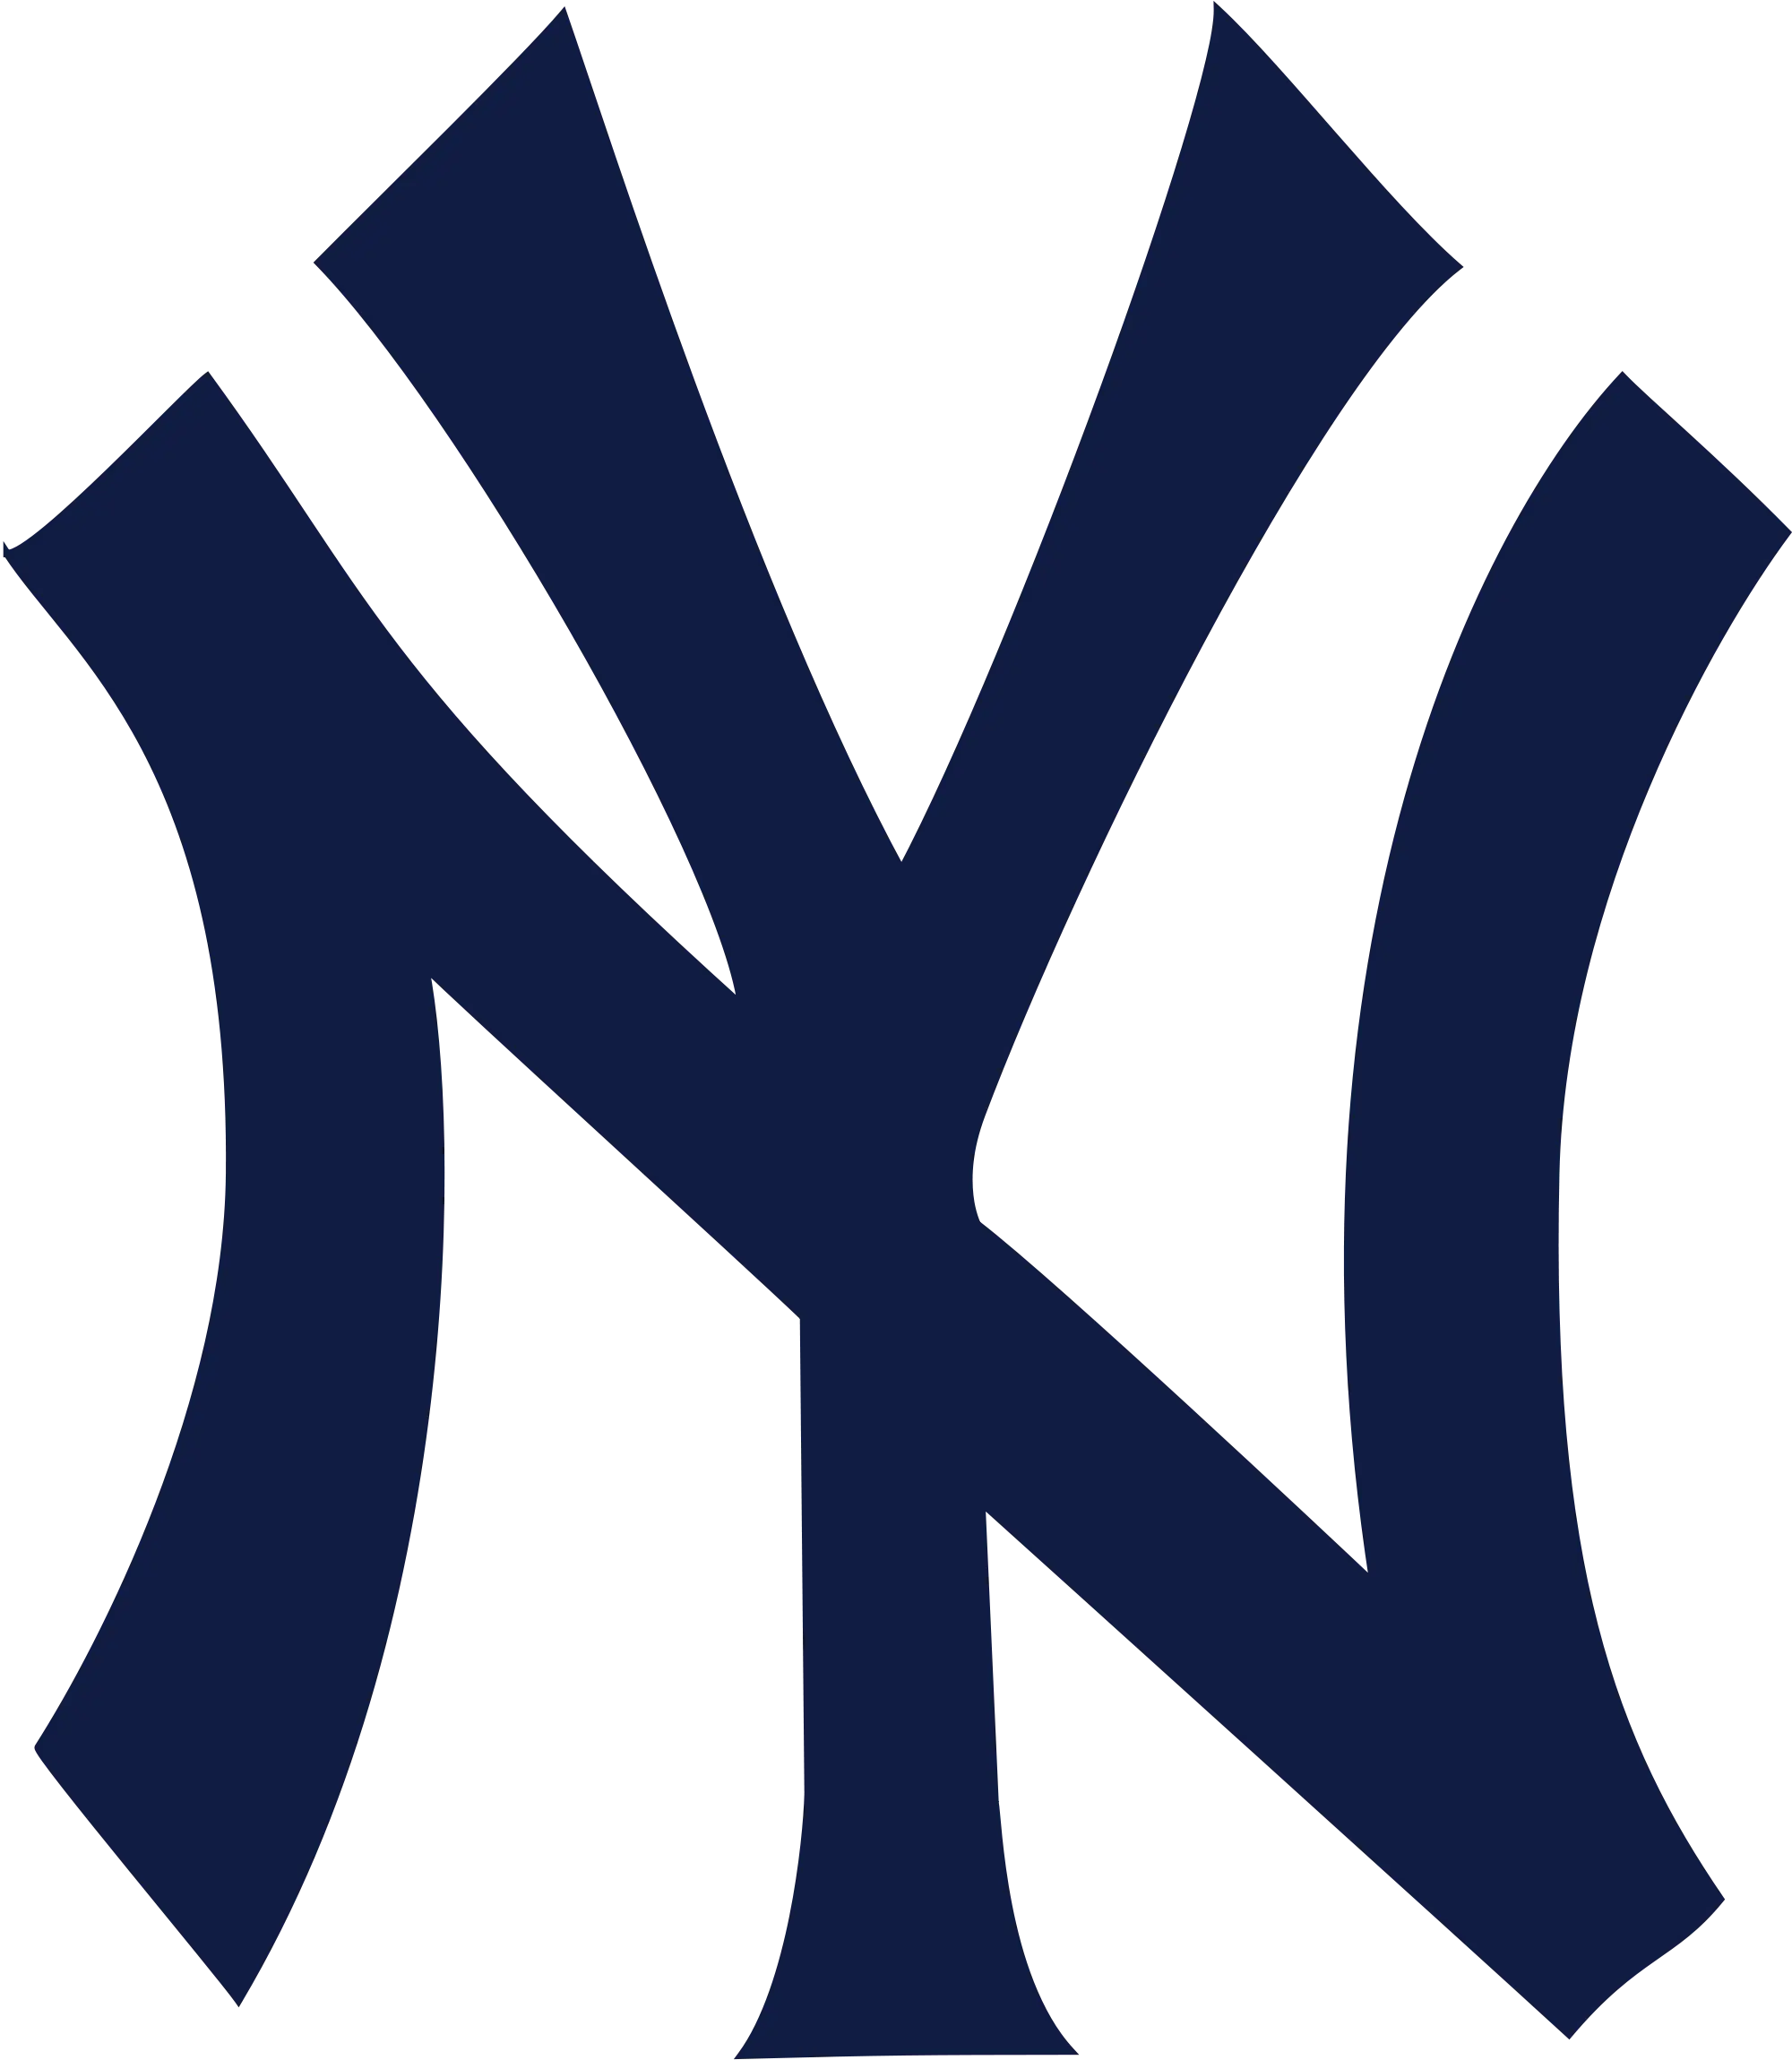 New York Yankees Logo, symbol, meaning, history, PNG, brand